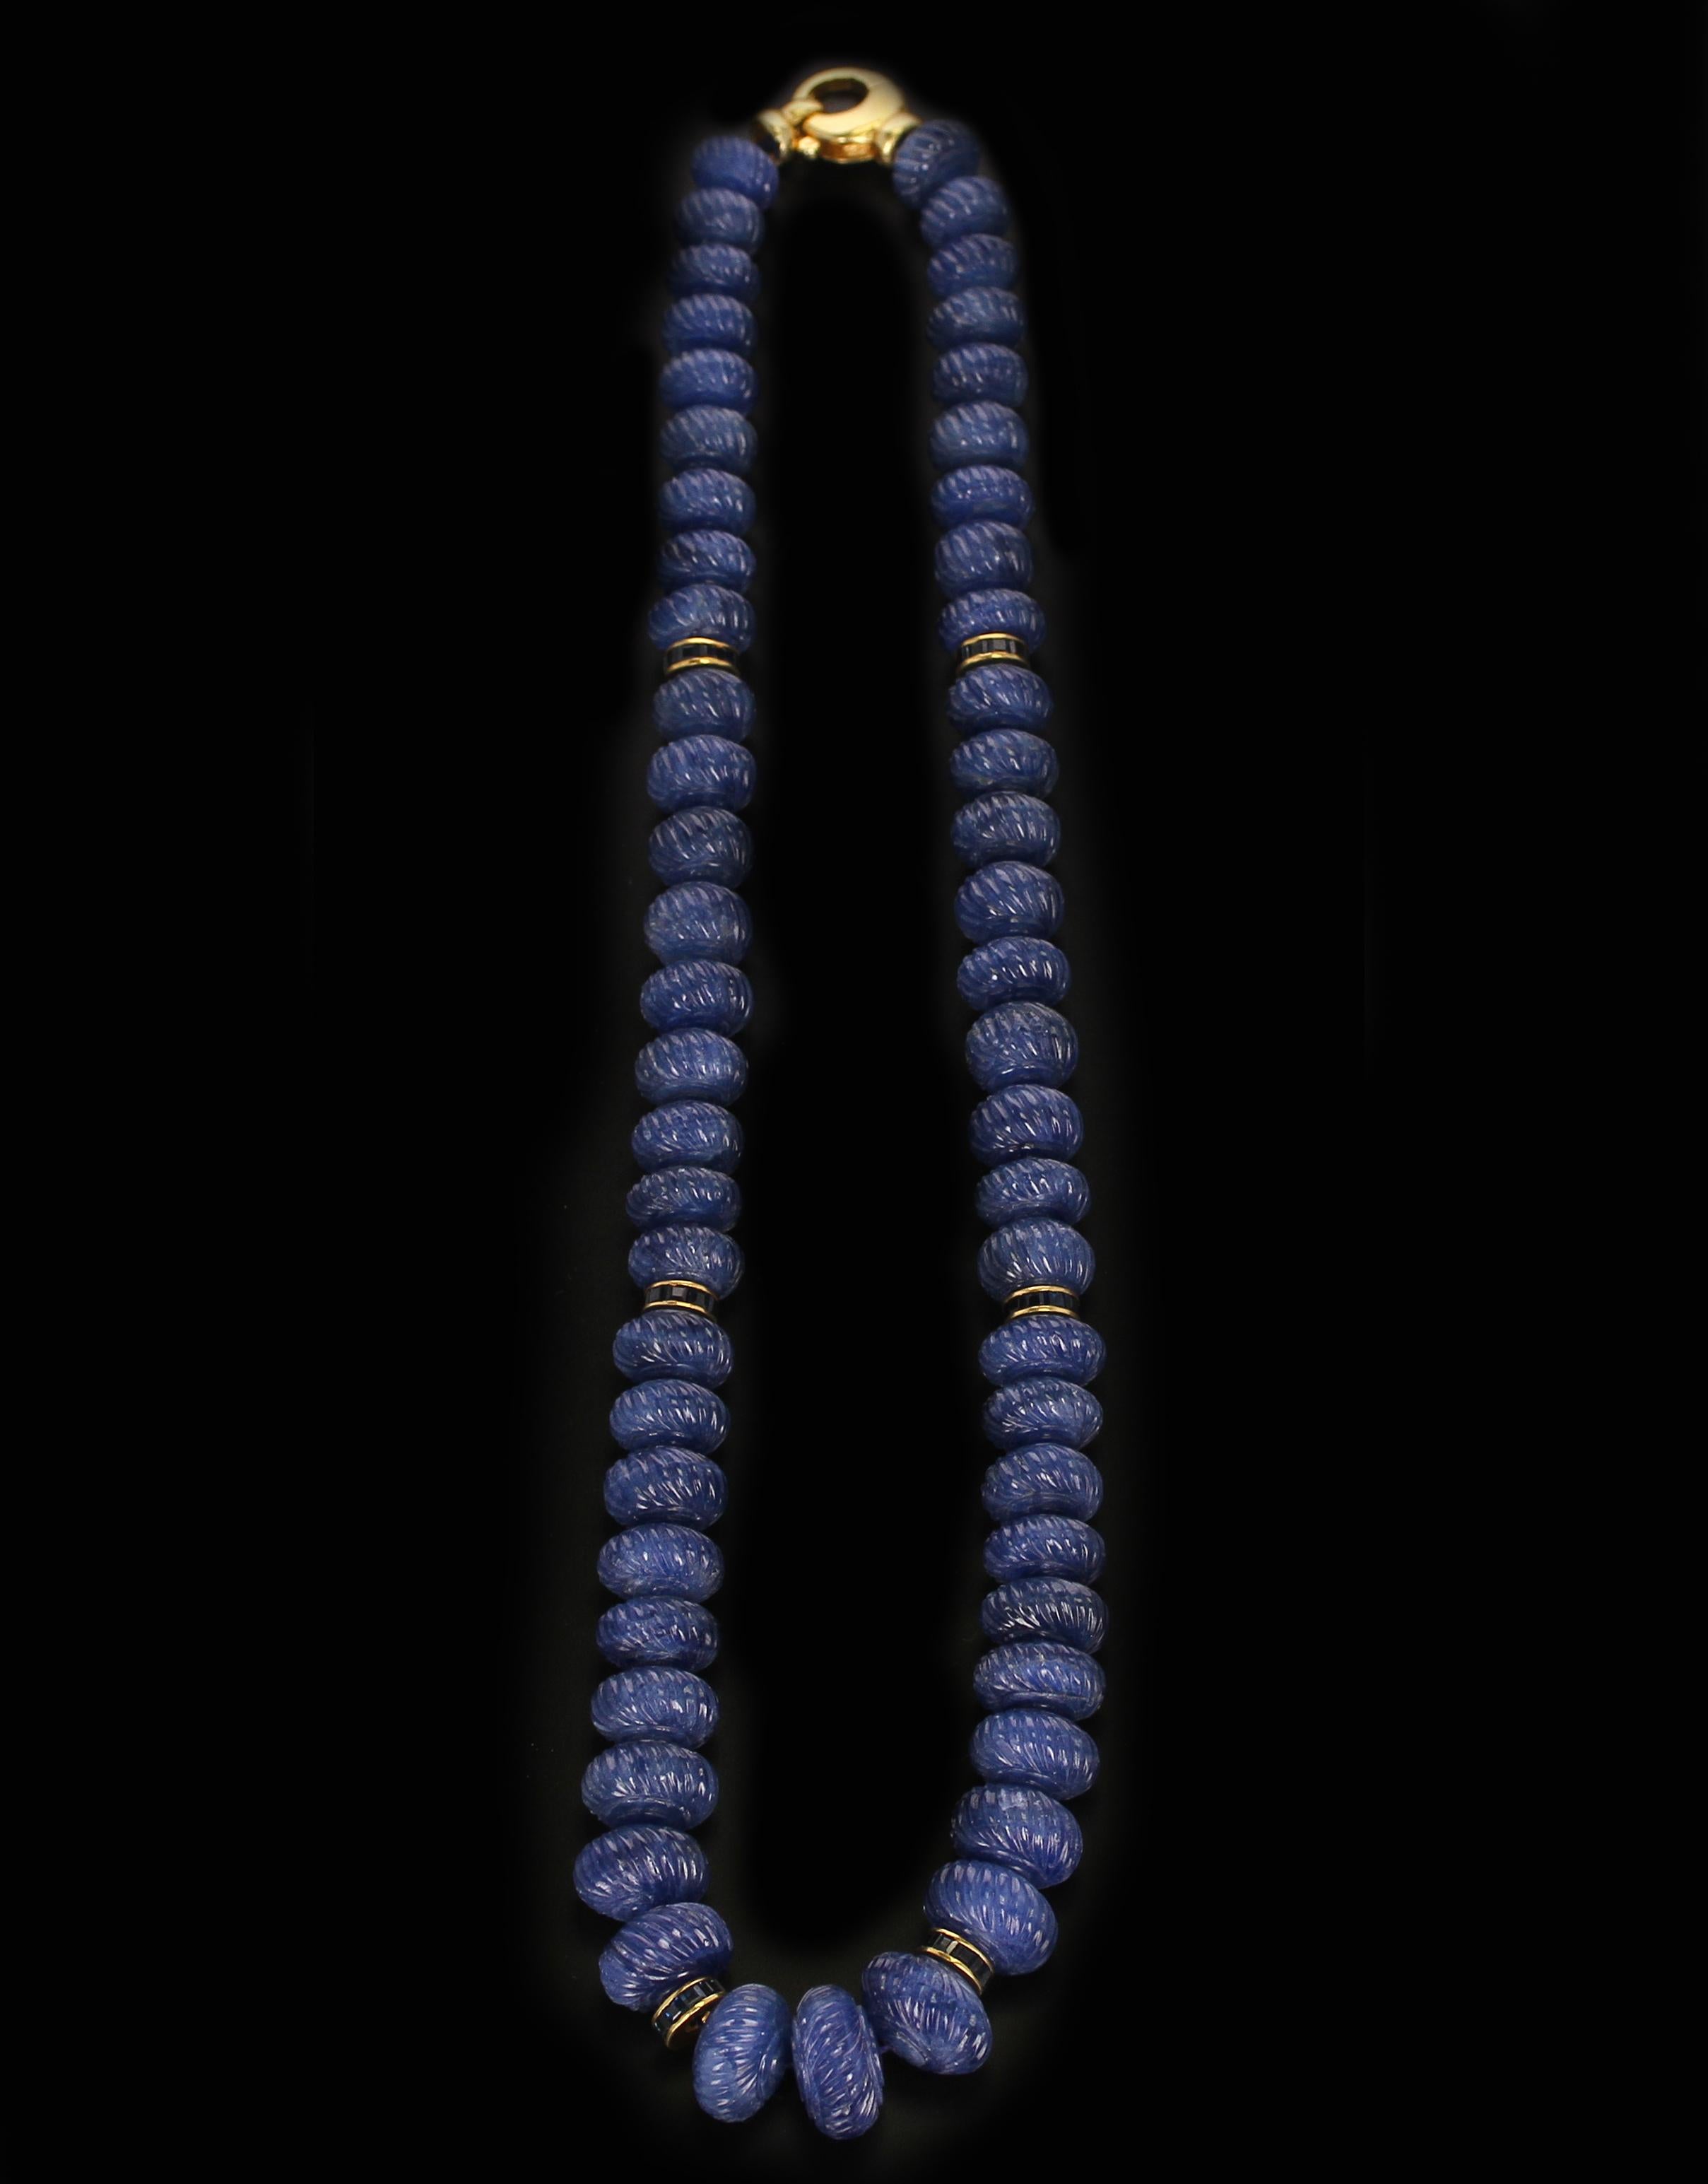 A fine necklace of Genuine & Natural Carved Blue Sapphire Beads with Calibre Sapphire & Gold Spacers. The beads range from 10MM to 15MM and the length is 18.